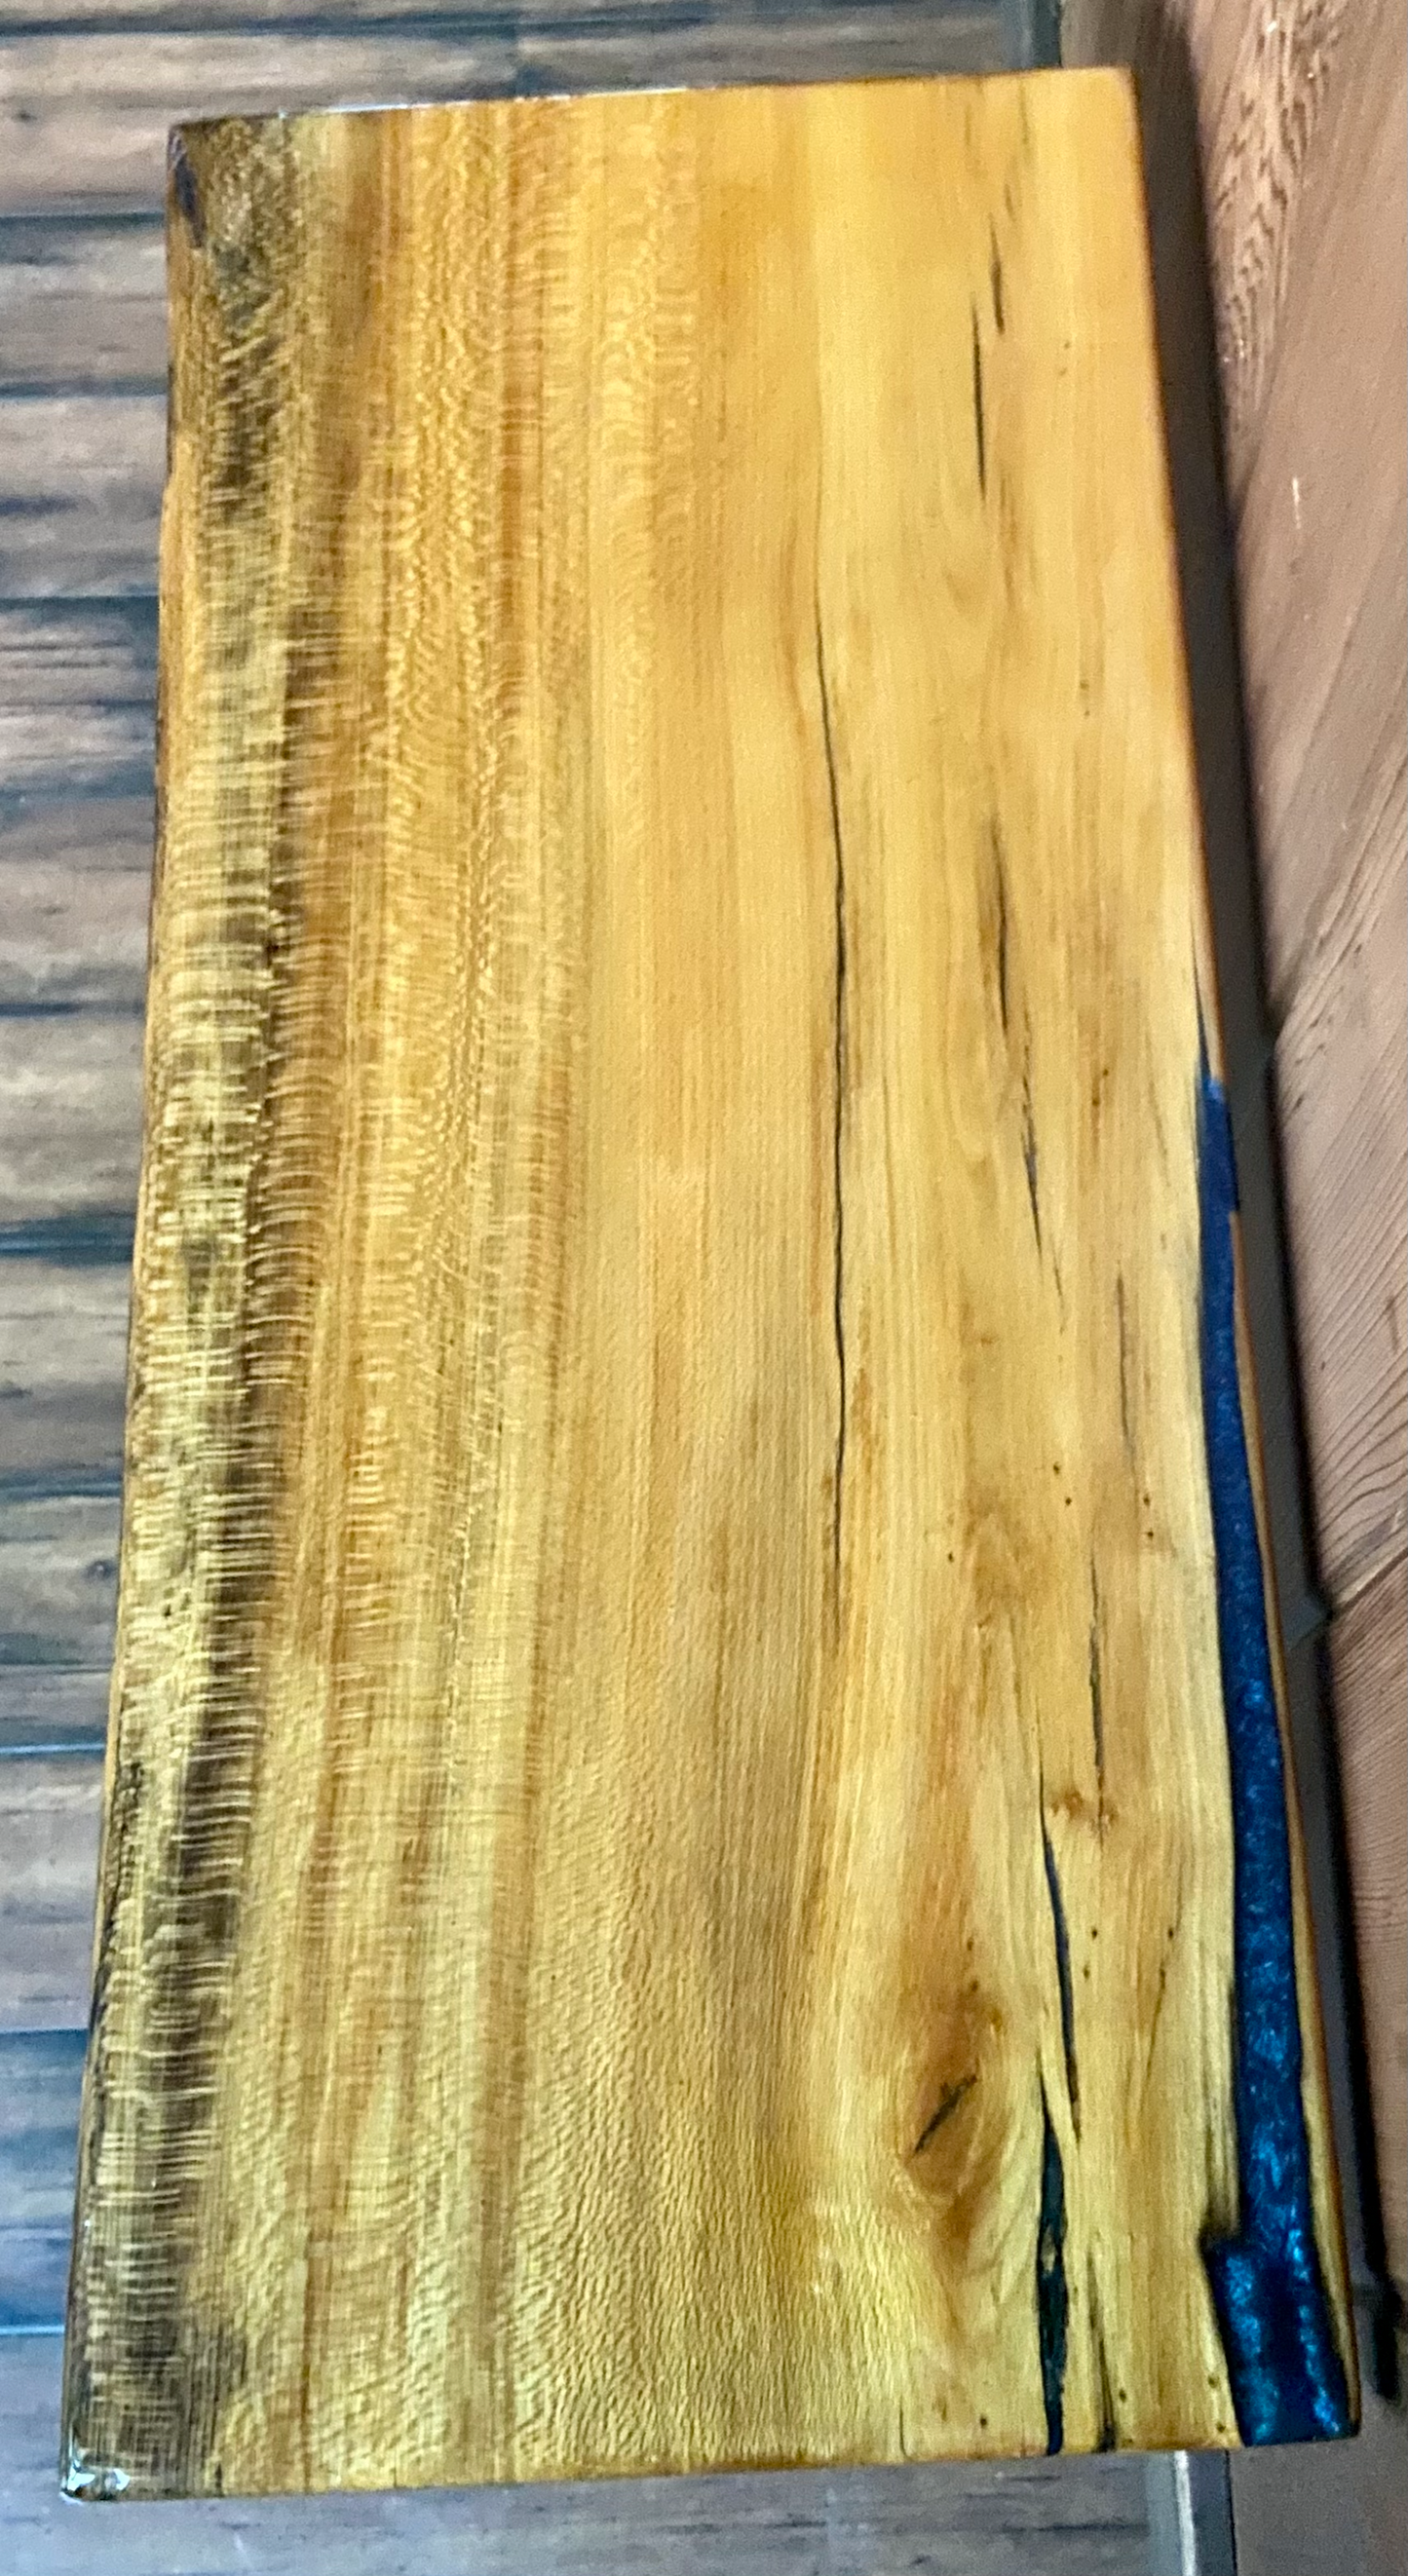 Rustic and Clean Live Edge Maple Accent Table with Epoxy Coat